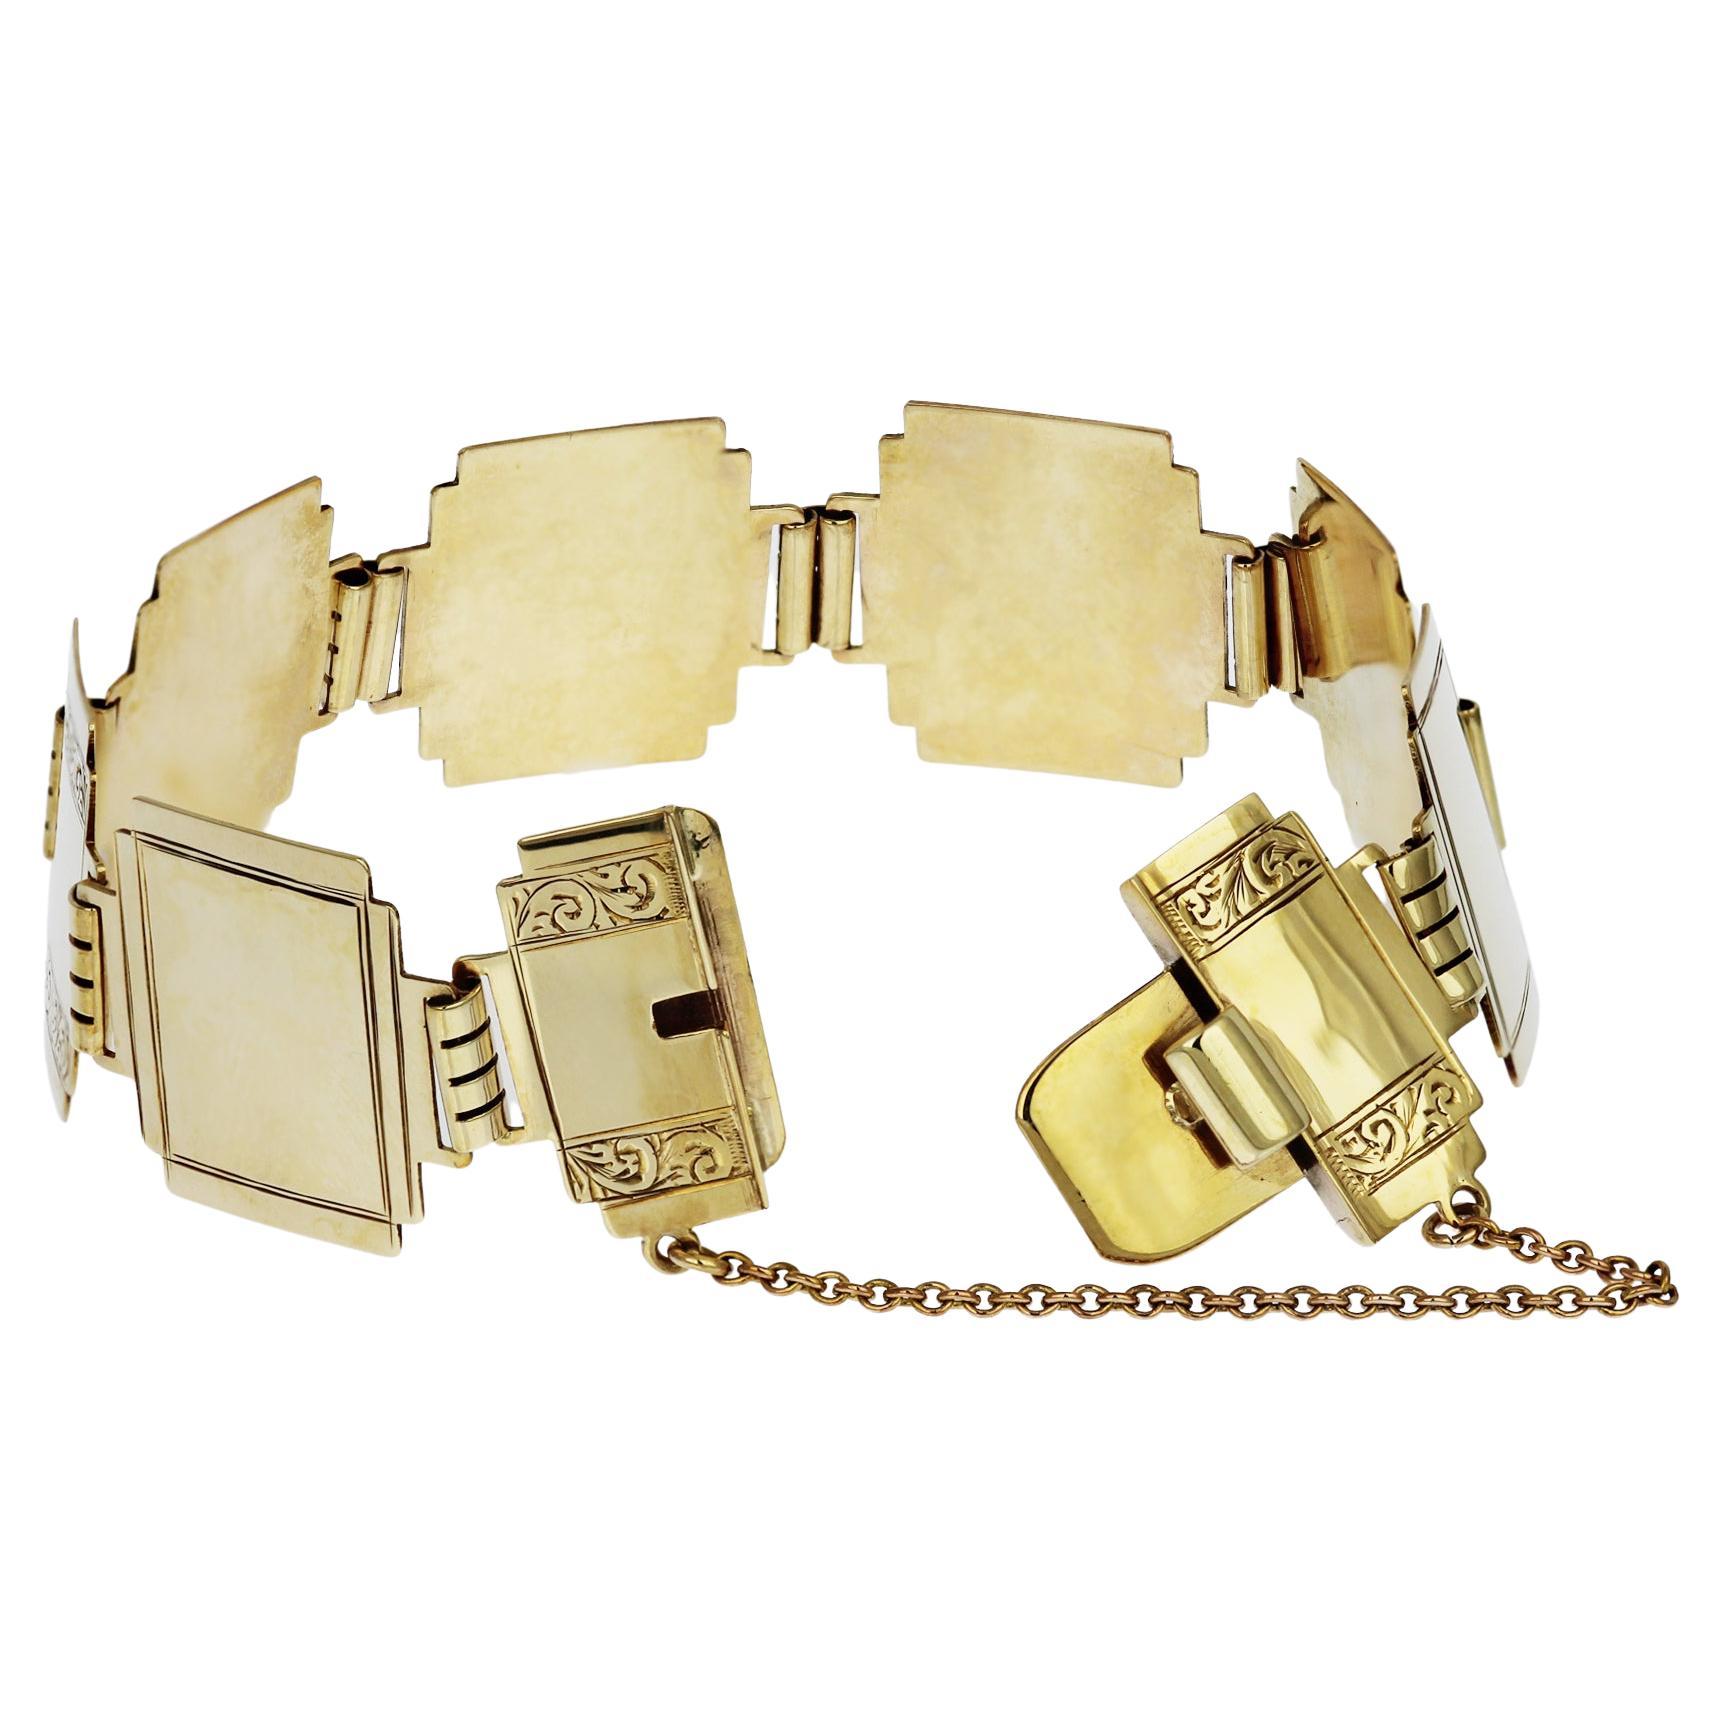 Antique Art Deco 9ct yellow gold bracelet with engraved square segments For Sale